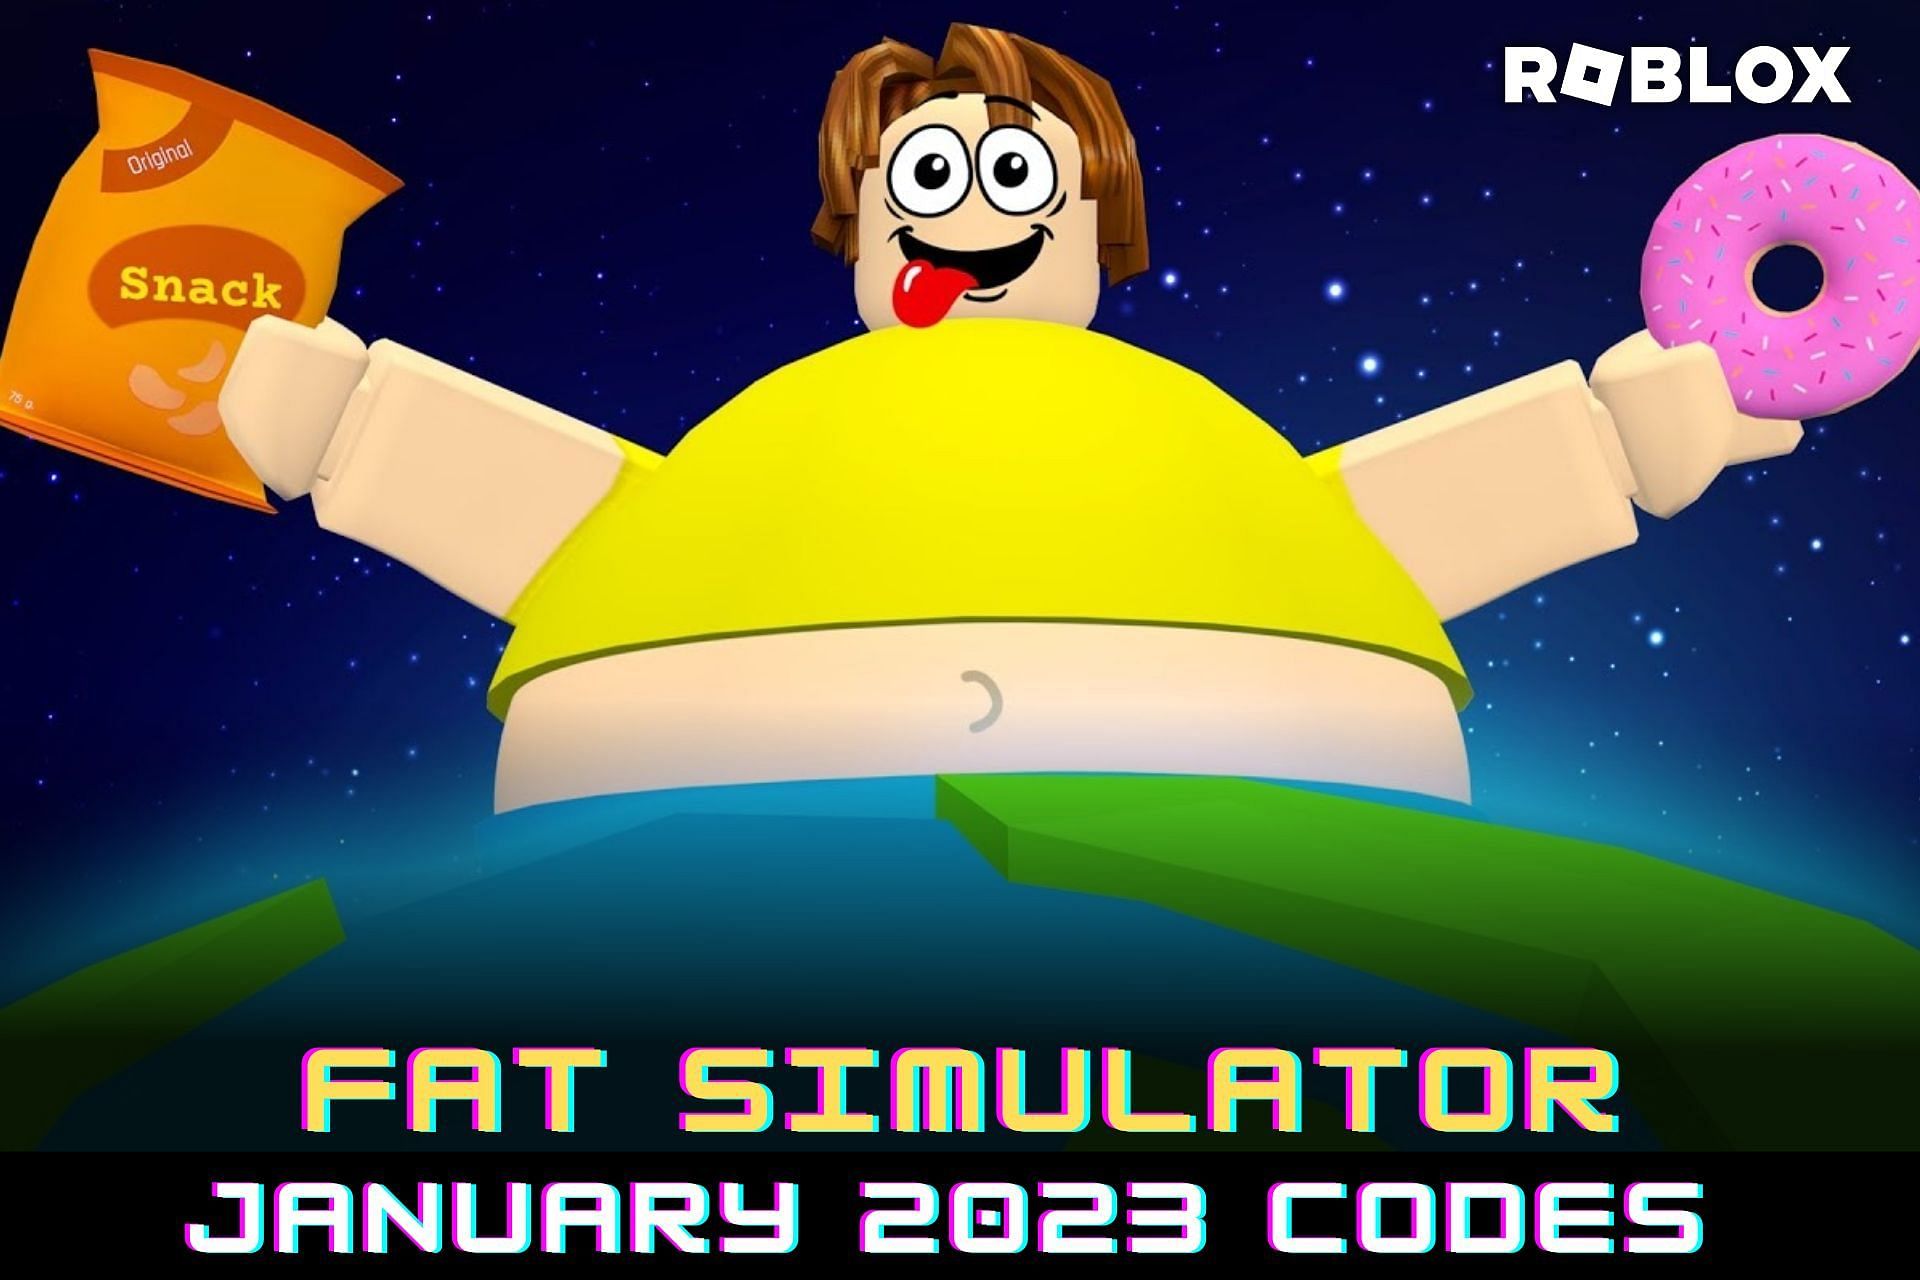 Roblox Fat Simulator codes for January 2023 Free pets and boosts